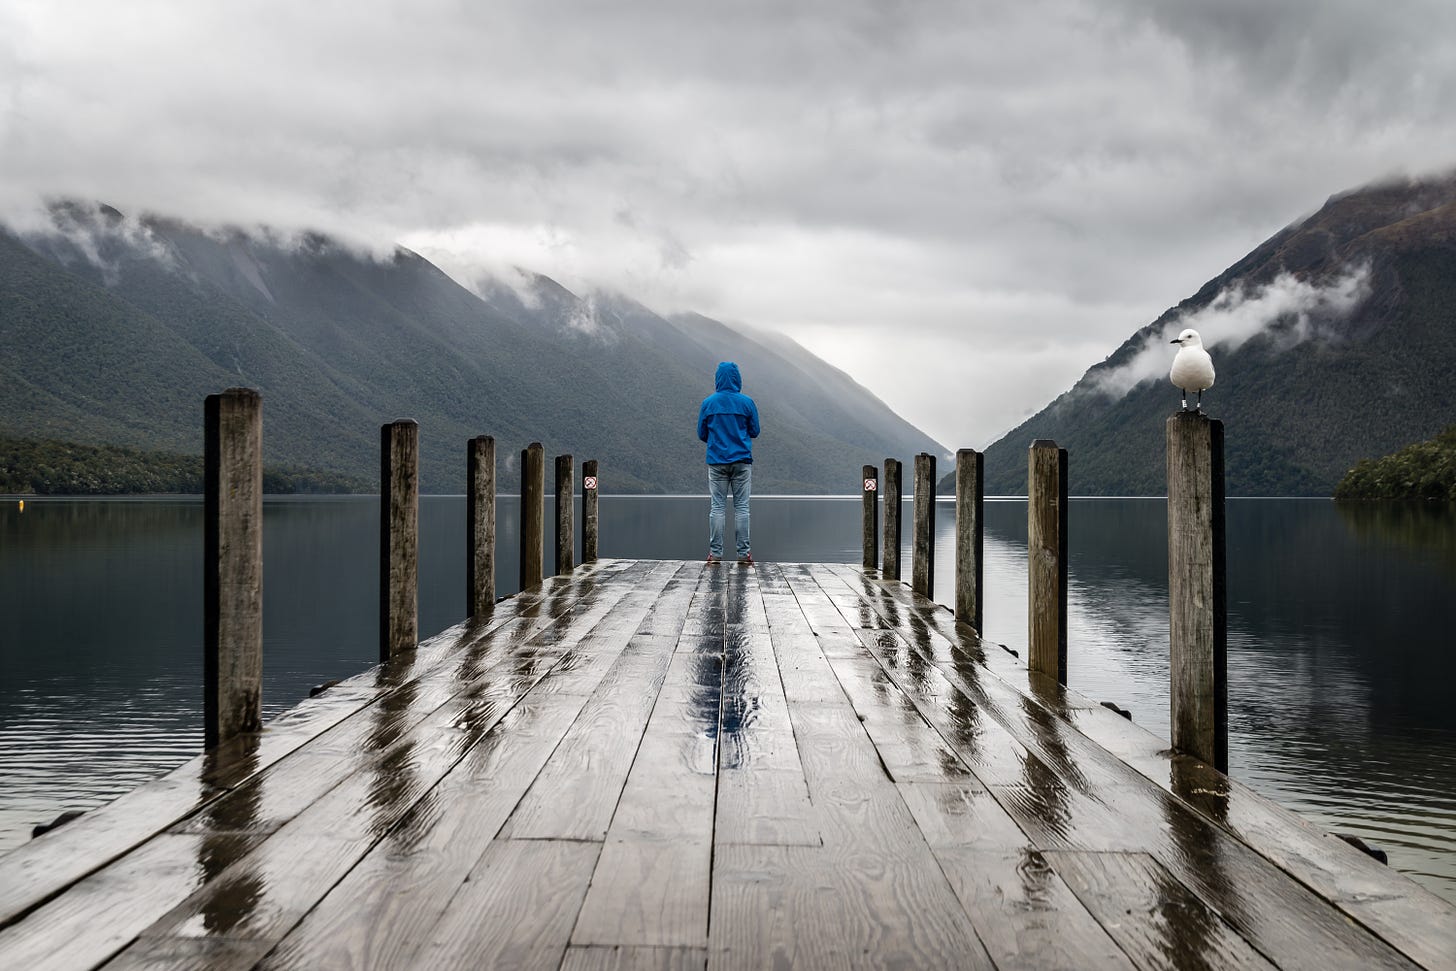 View of a person in a blue hoodie standing at the end of a rain-soaked dock while looking out on a calm lake surrounded by mountains topped in low-hanging gray clouds.